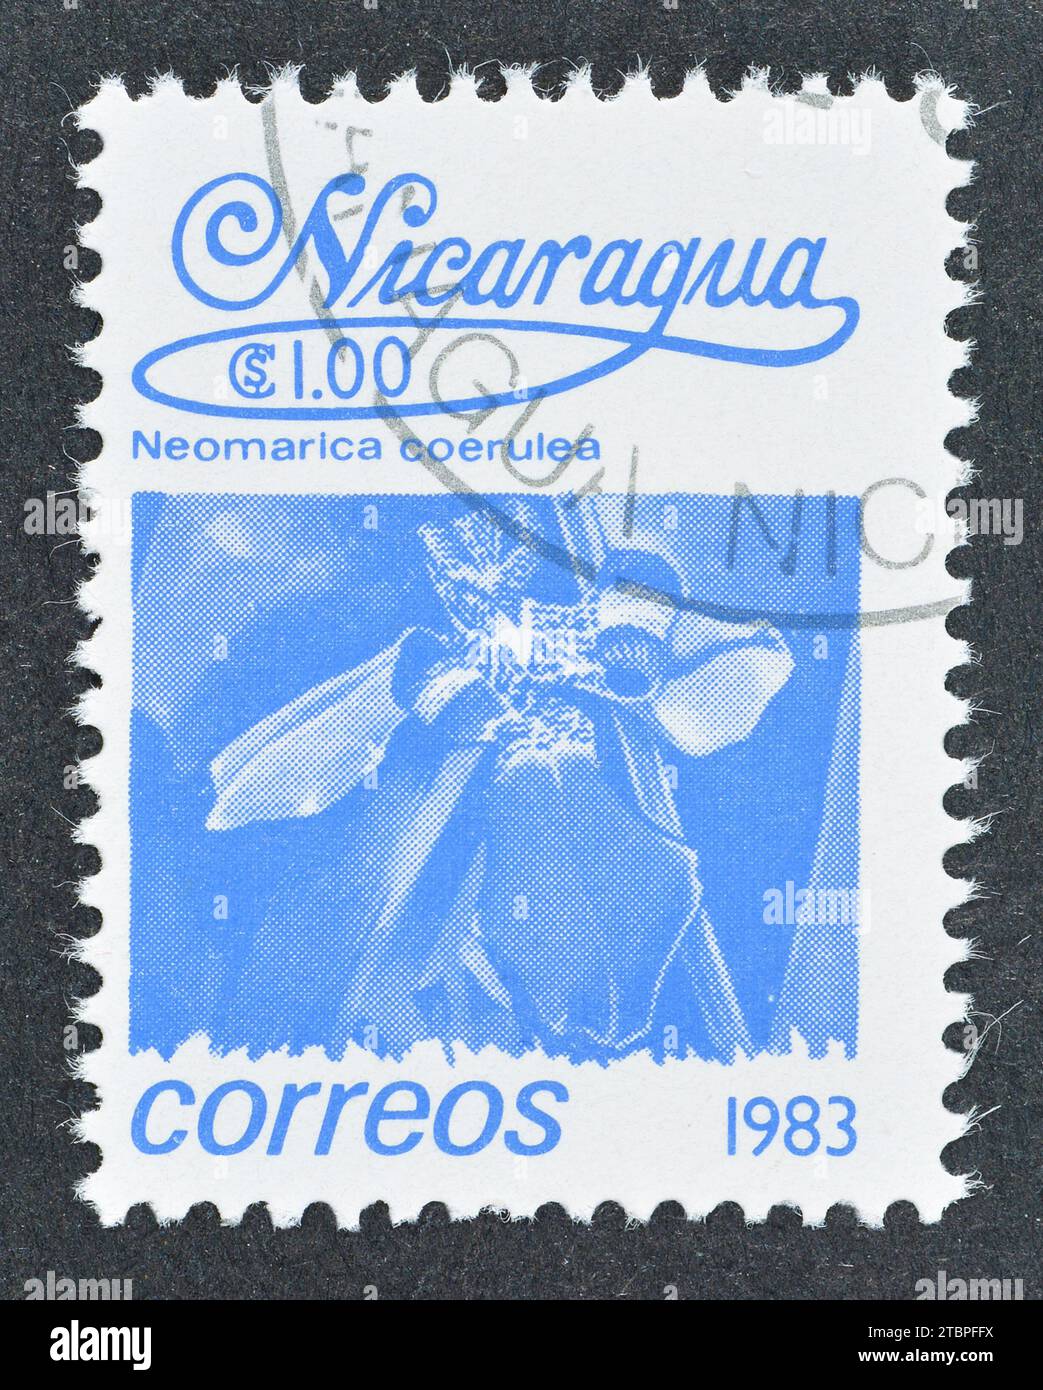 Cancelled postage stamp printed by Nicaragua, that shows Neomarica coerulea, circa 1983. Stock Photo